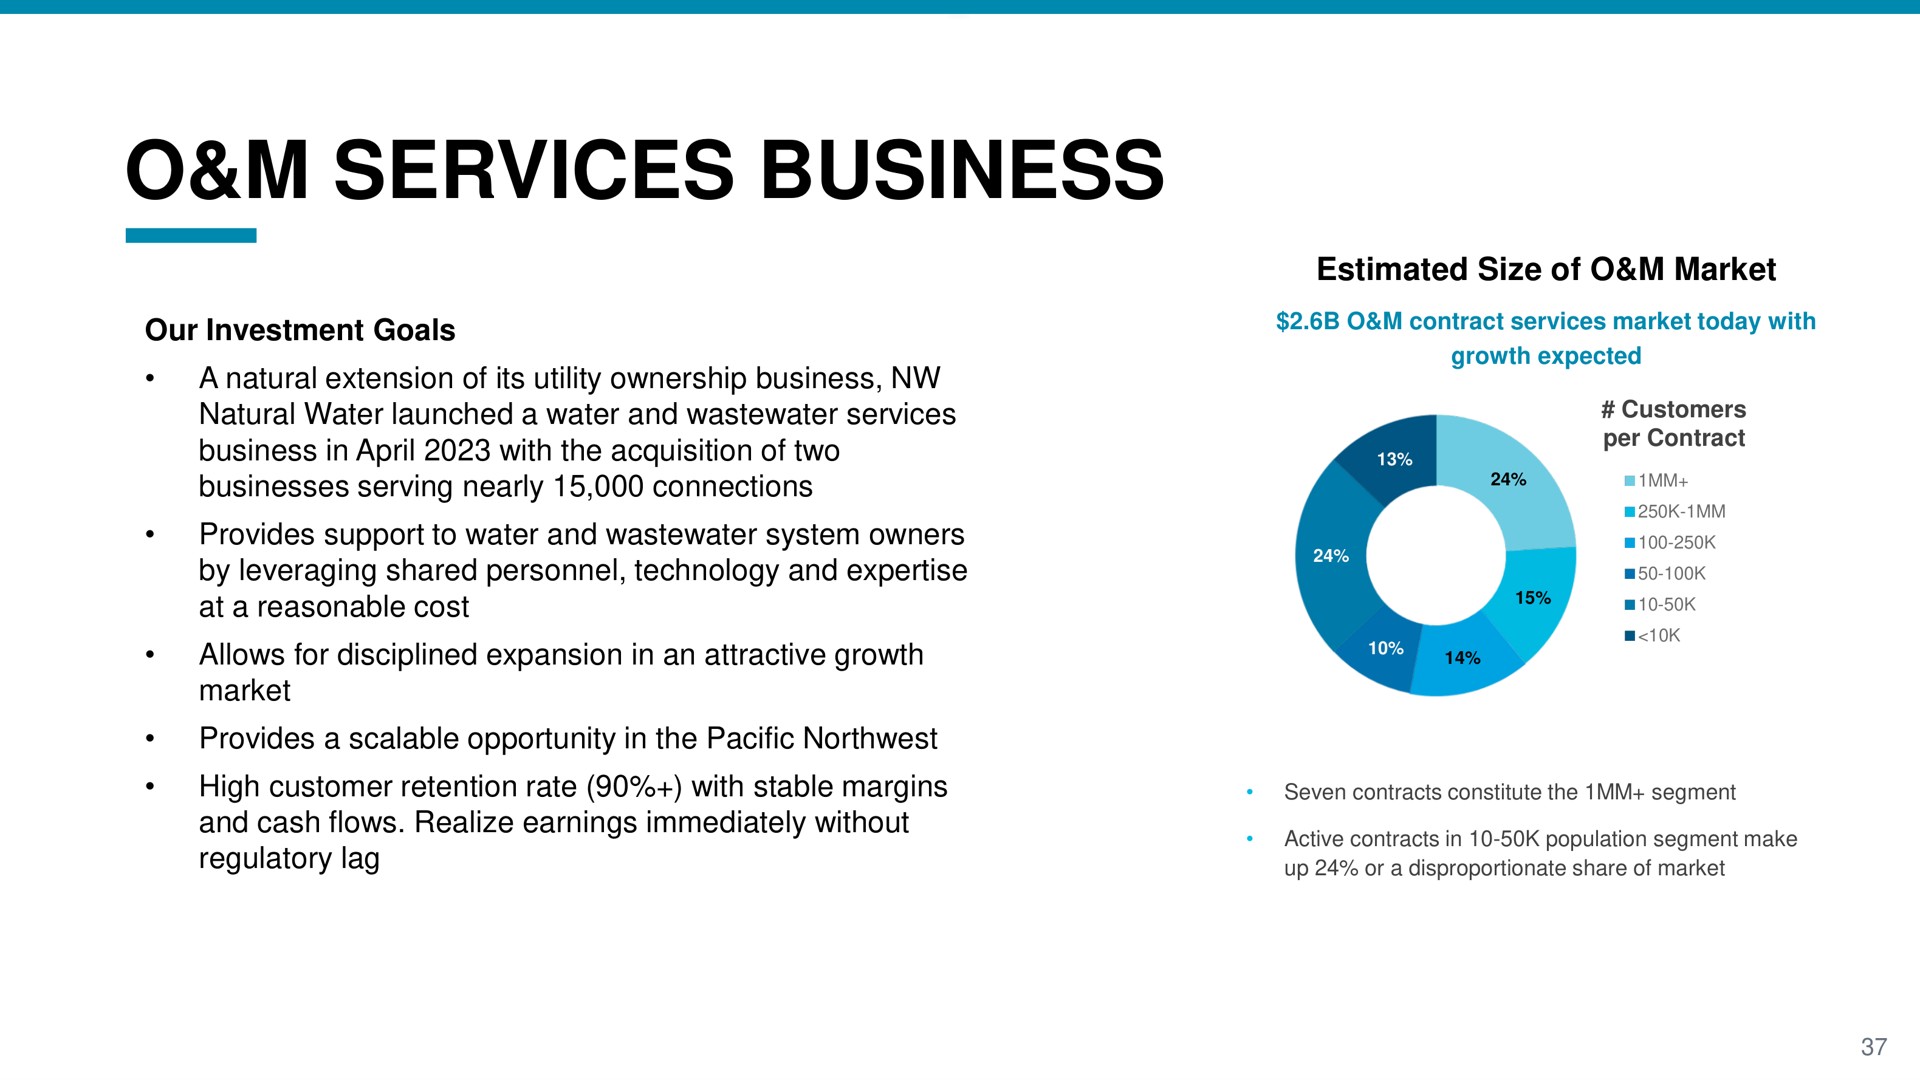 services business | NW Natural Holdings